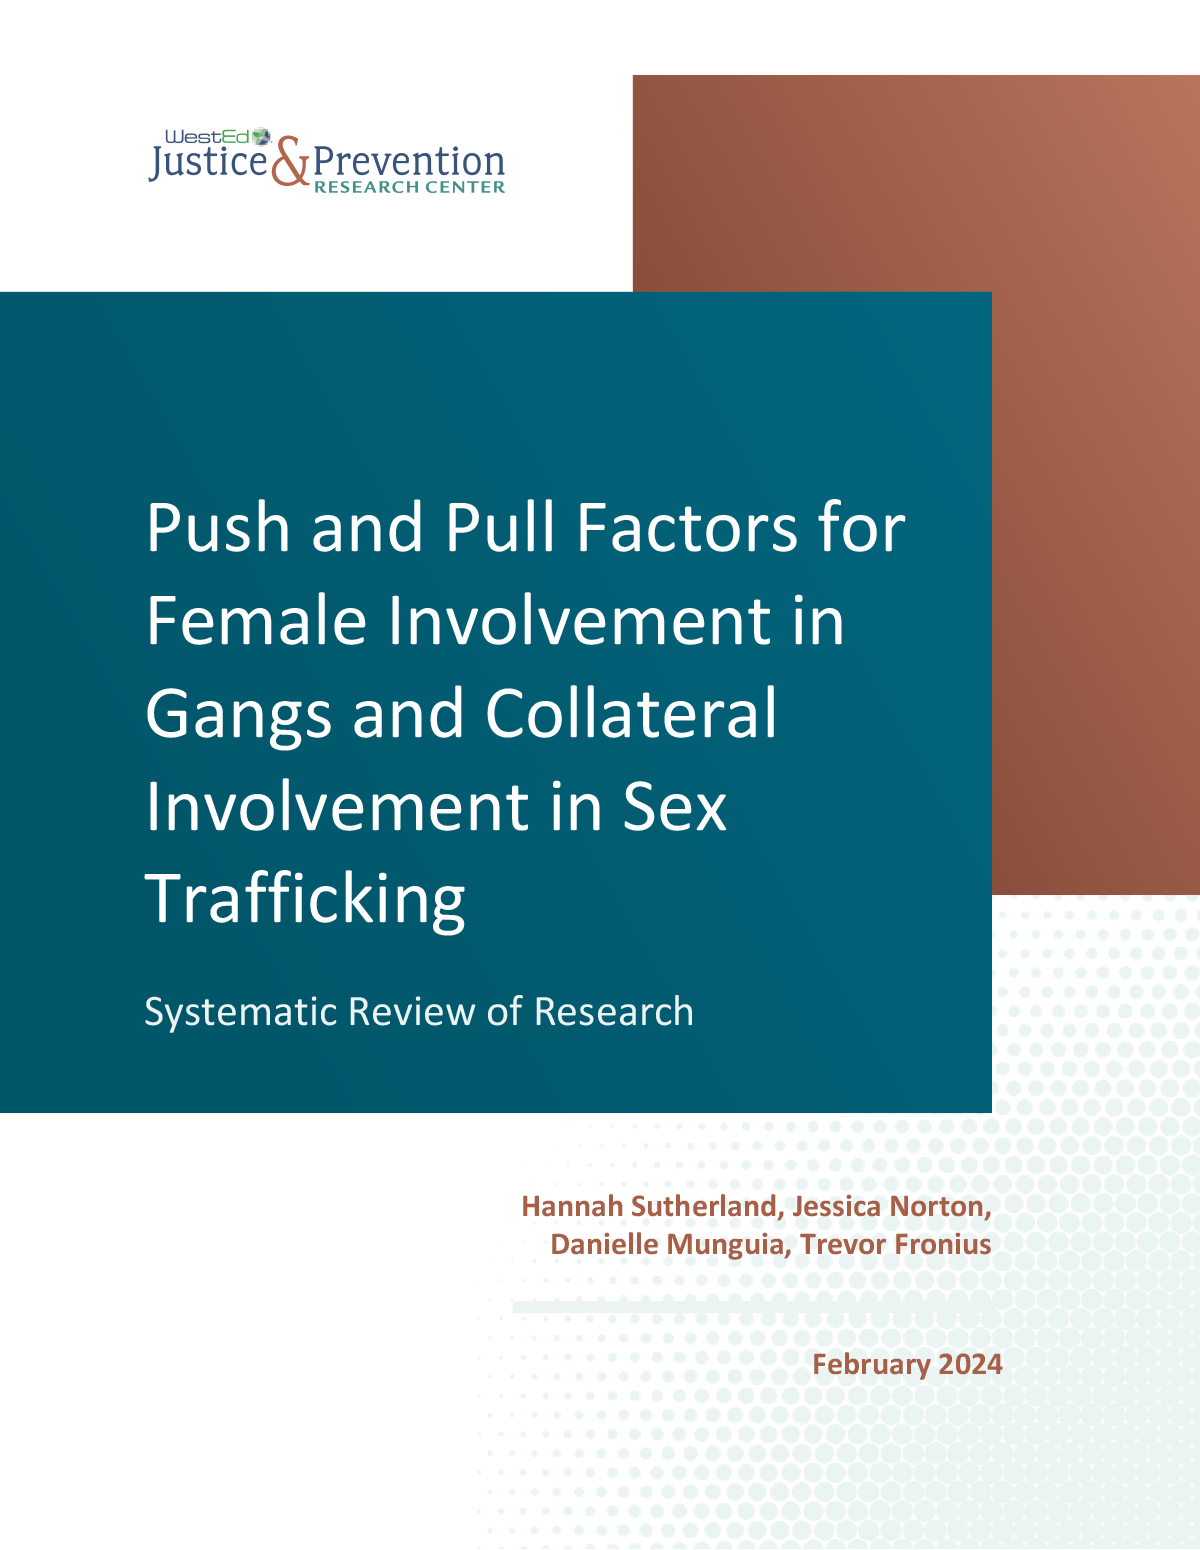 Push and Pull Factors for Female Involvement in Gangs and Collateral Involvement in Sex Trafficking: Systematic Review of Research